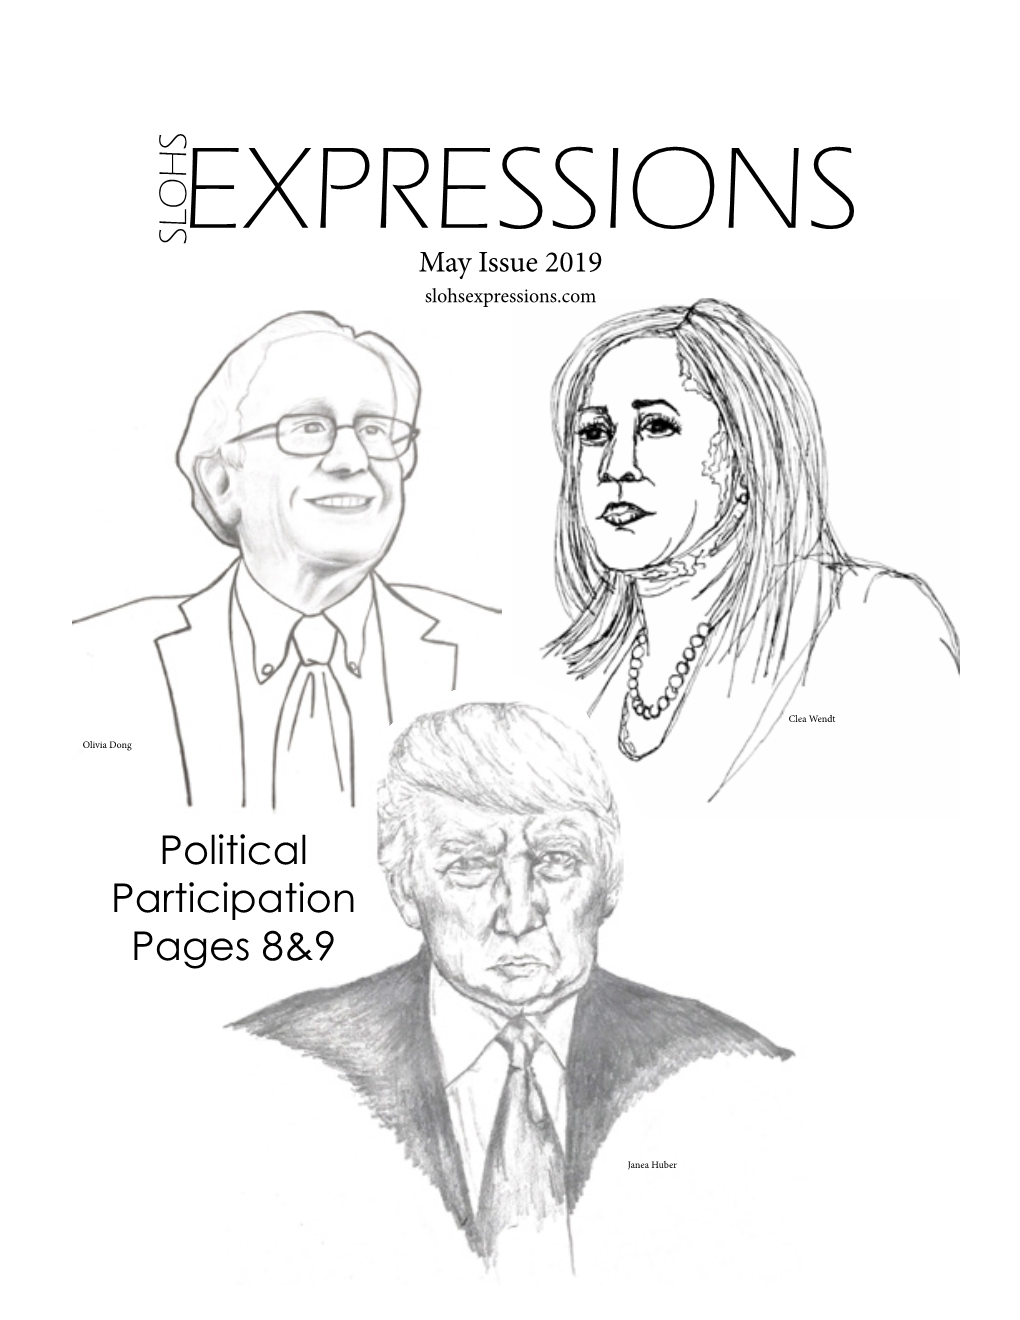 May Issue 2019 – Political Participation